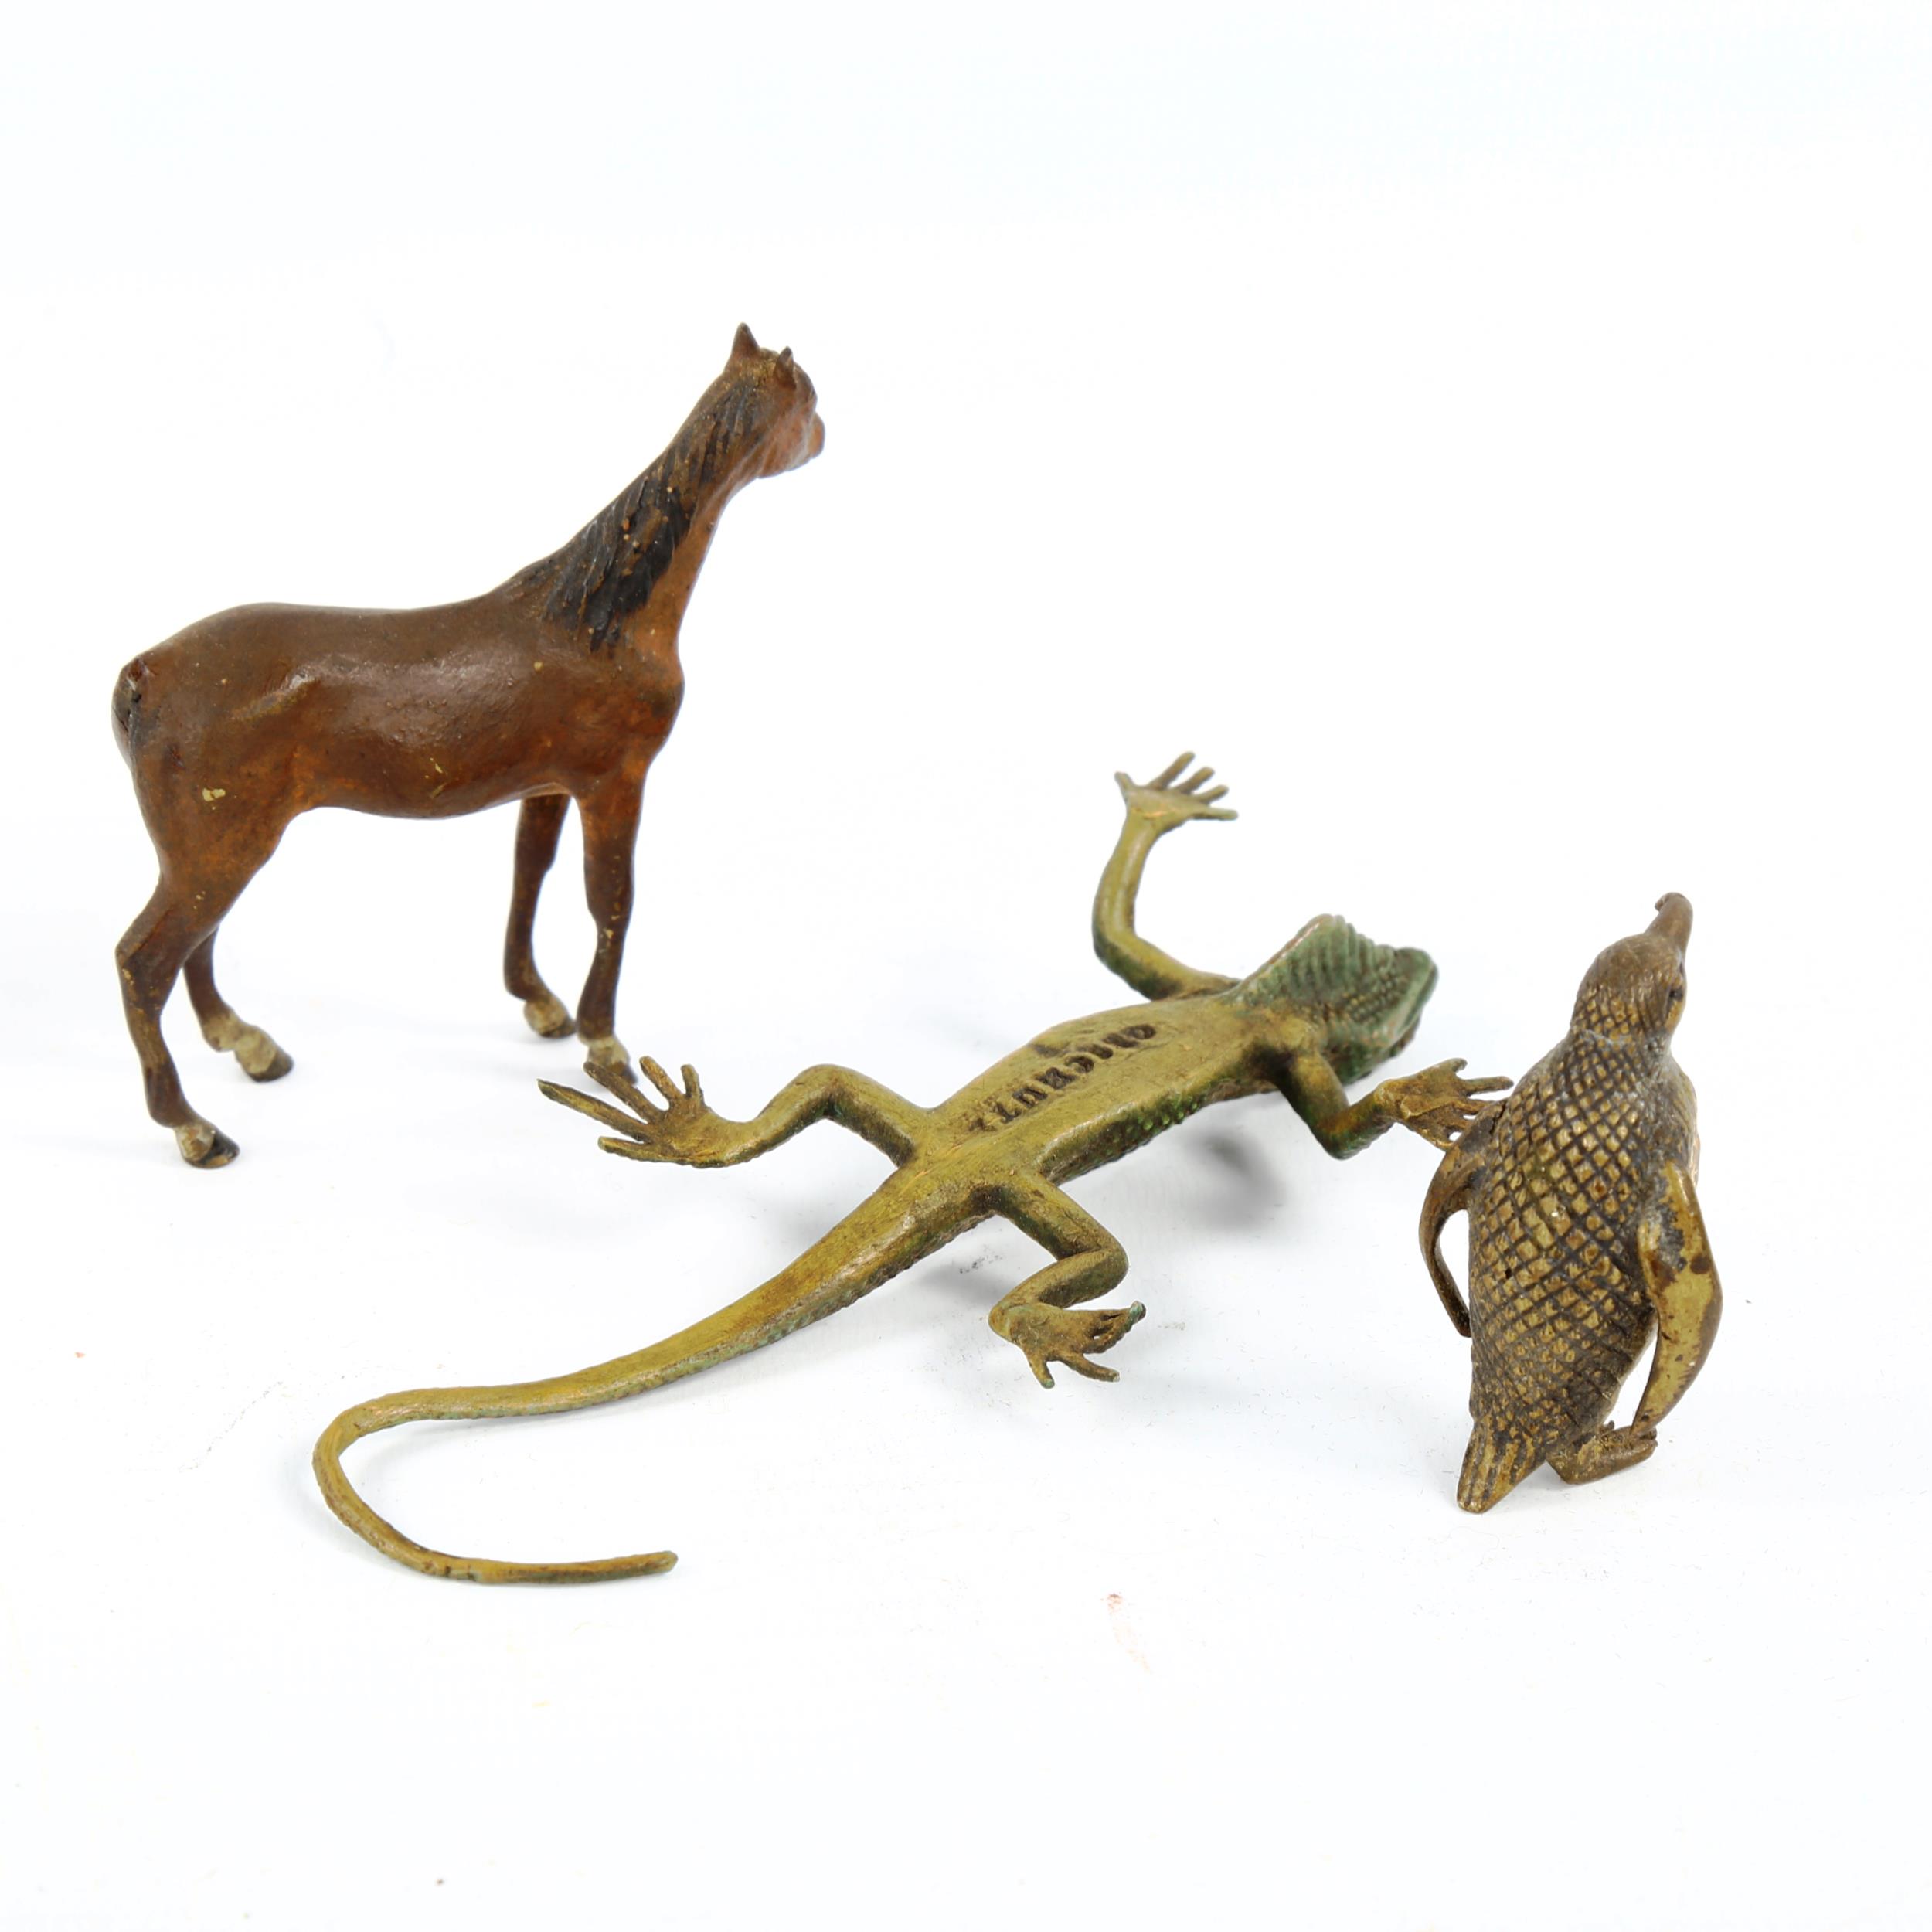 3 Austrian cold painted bronze animals, penguin, height 4cm, horse, height 6cm, and a lizard (3) - Image 2 of 3